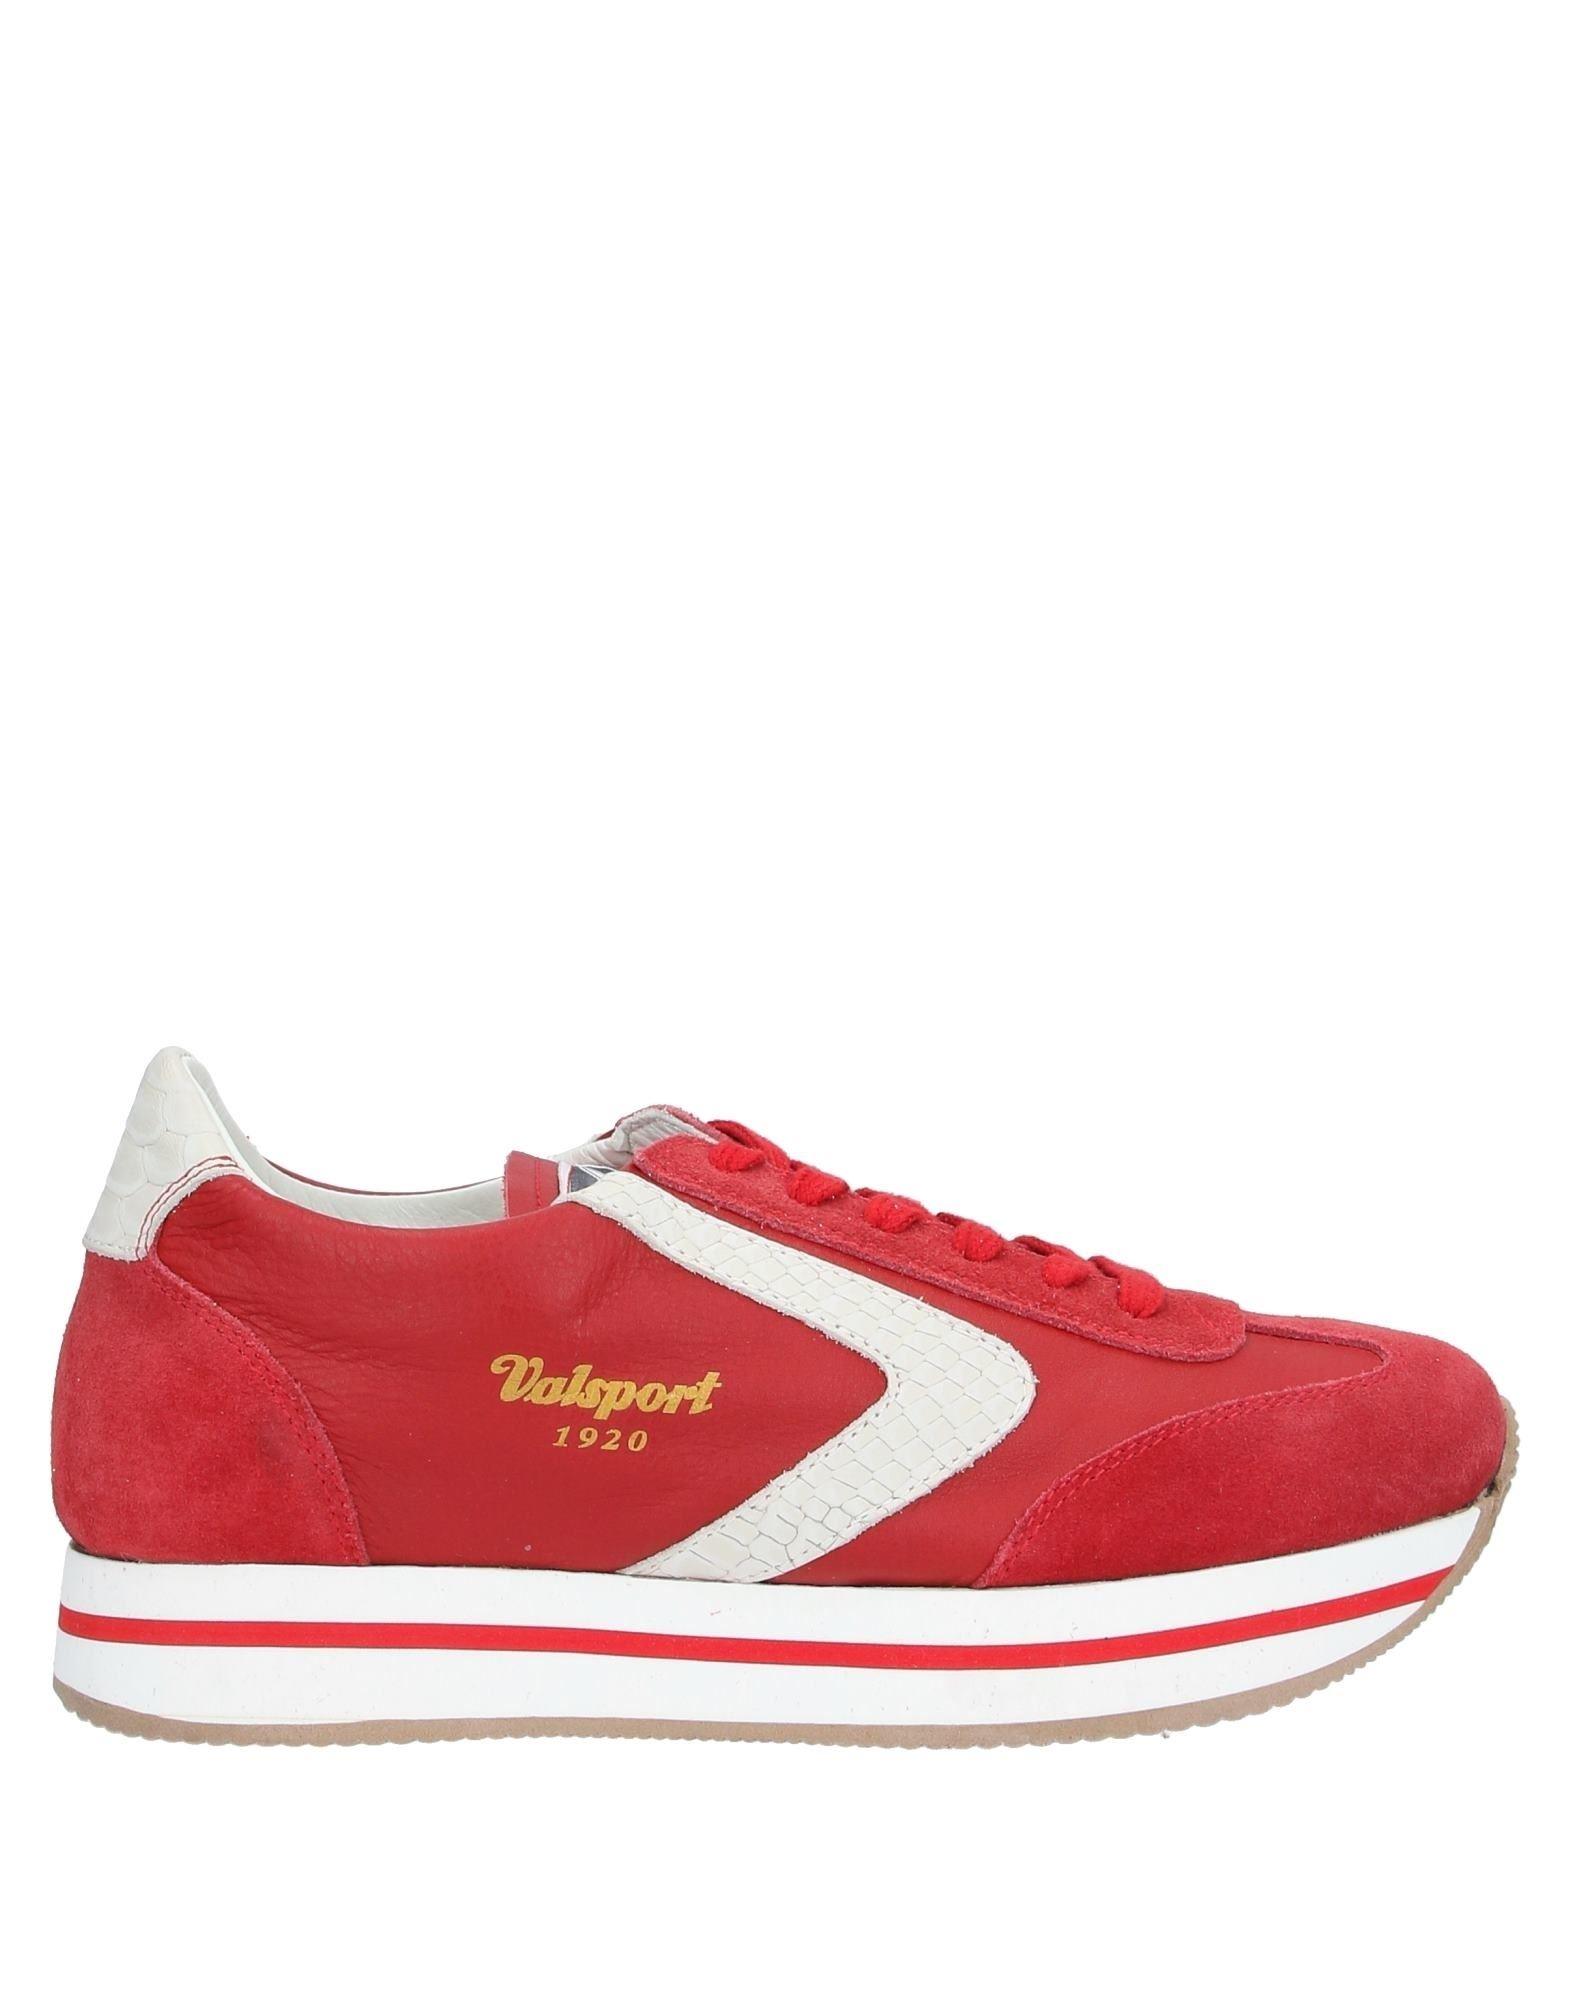 Valsport Sneakers in Red | Lyst